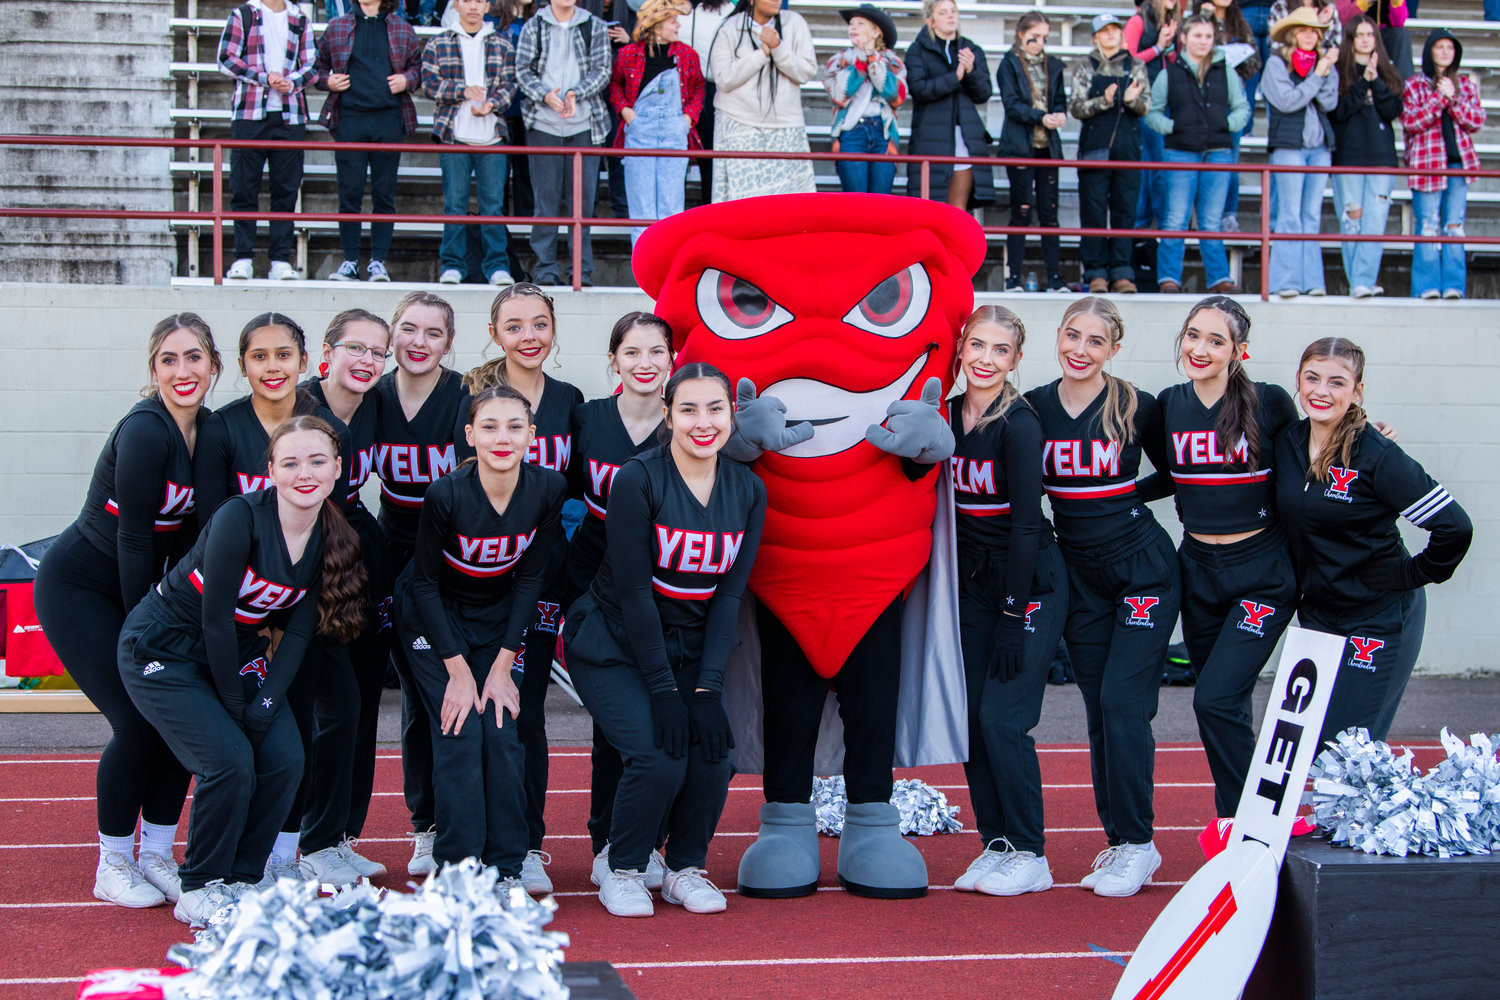 Tornado cheerleaders smile and pose for a photo with the Yelm High School mascot during a footbal game on Saturday.